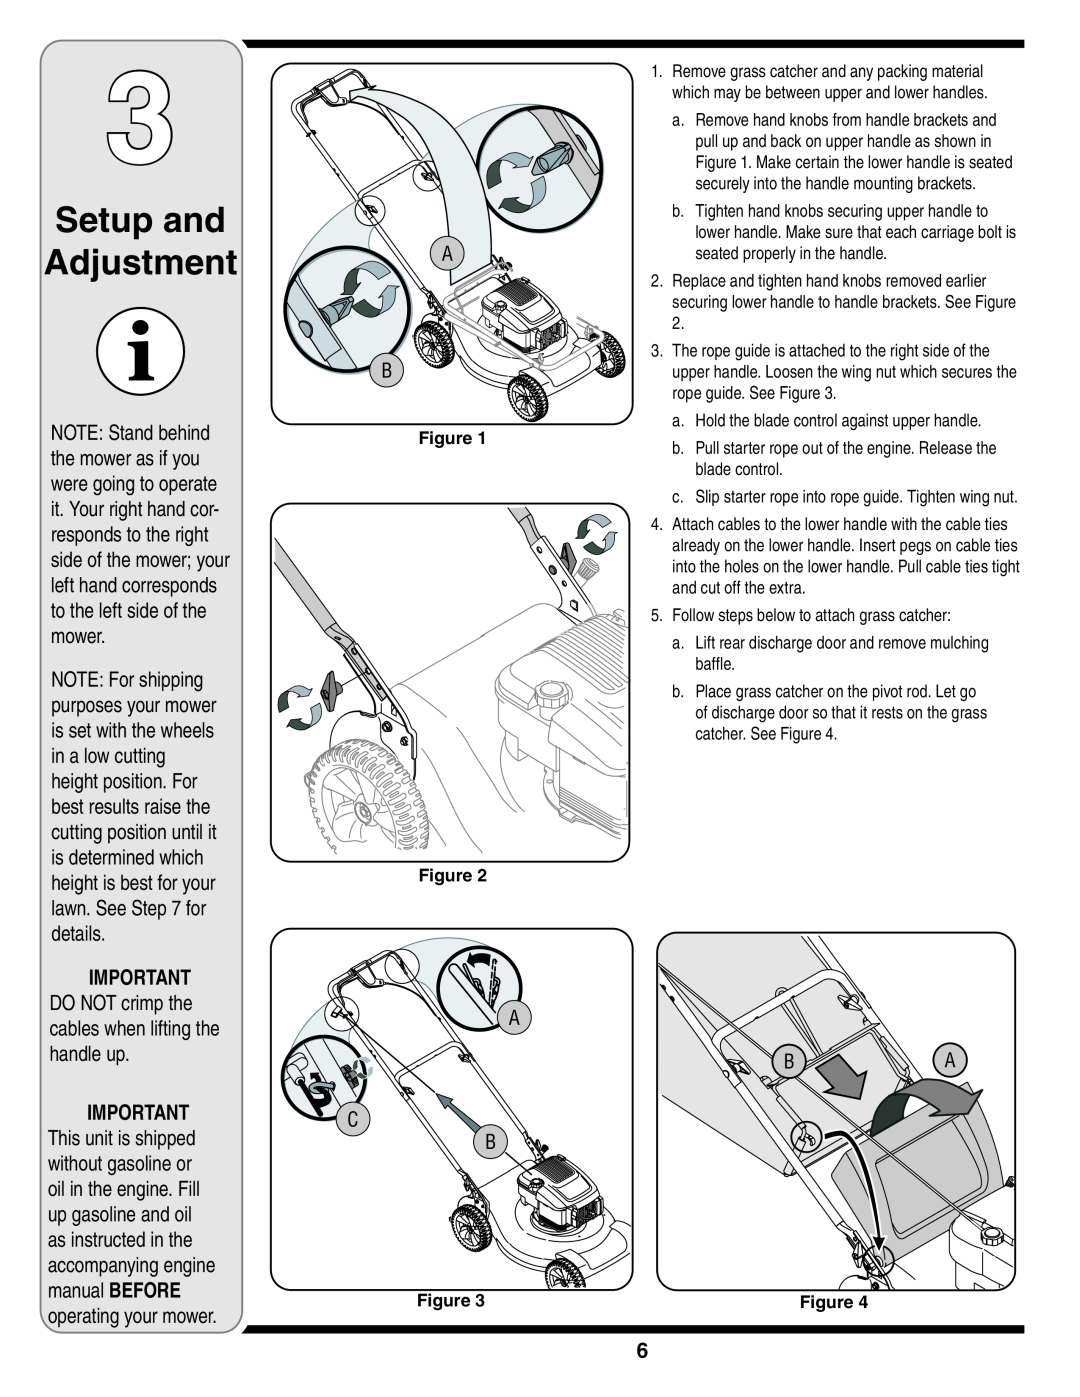 Yard-Man 829 warranty Setup and Adjustment, IMPORTANT DO NOT crimp the cables when lifting the handle up, A C B 